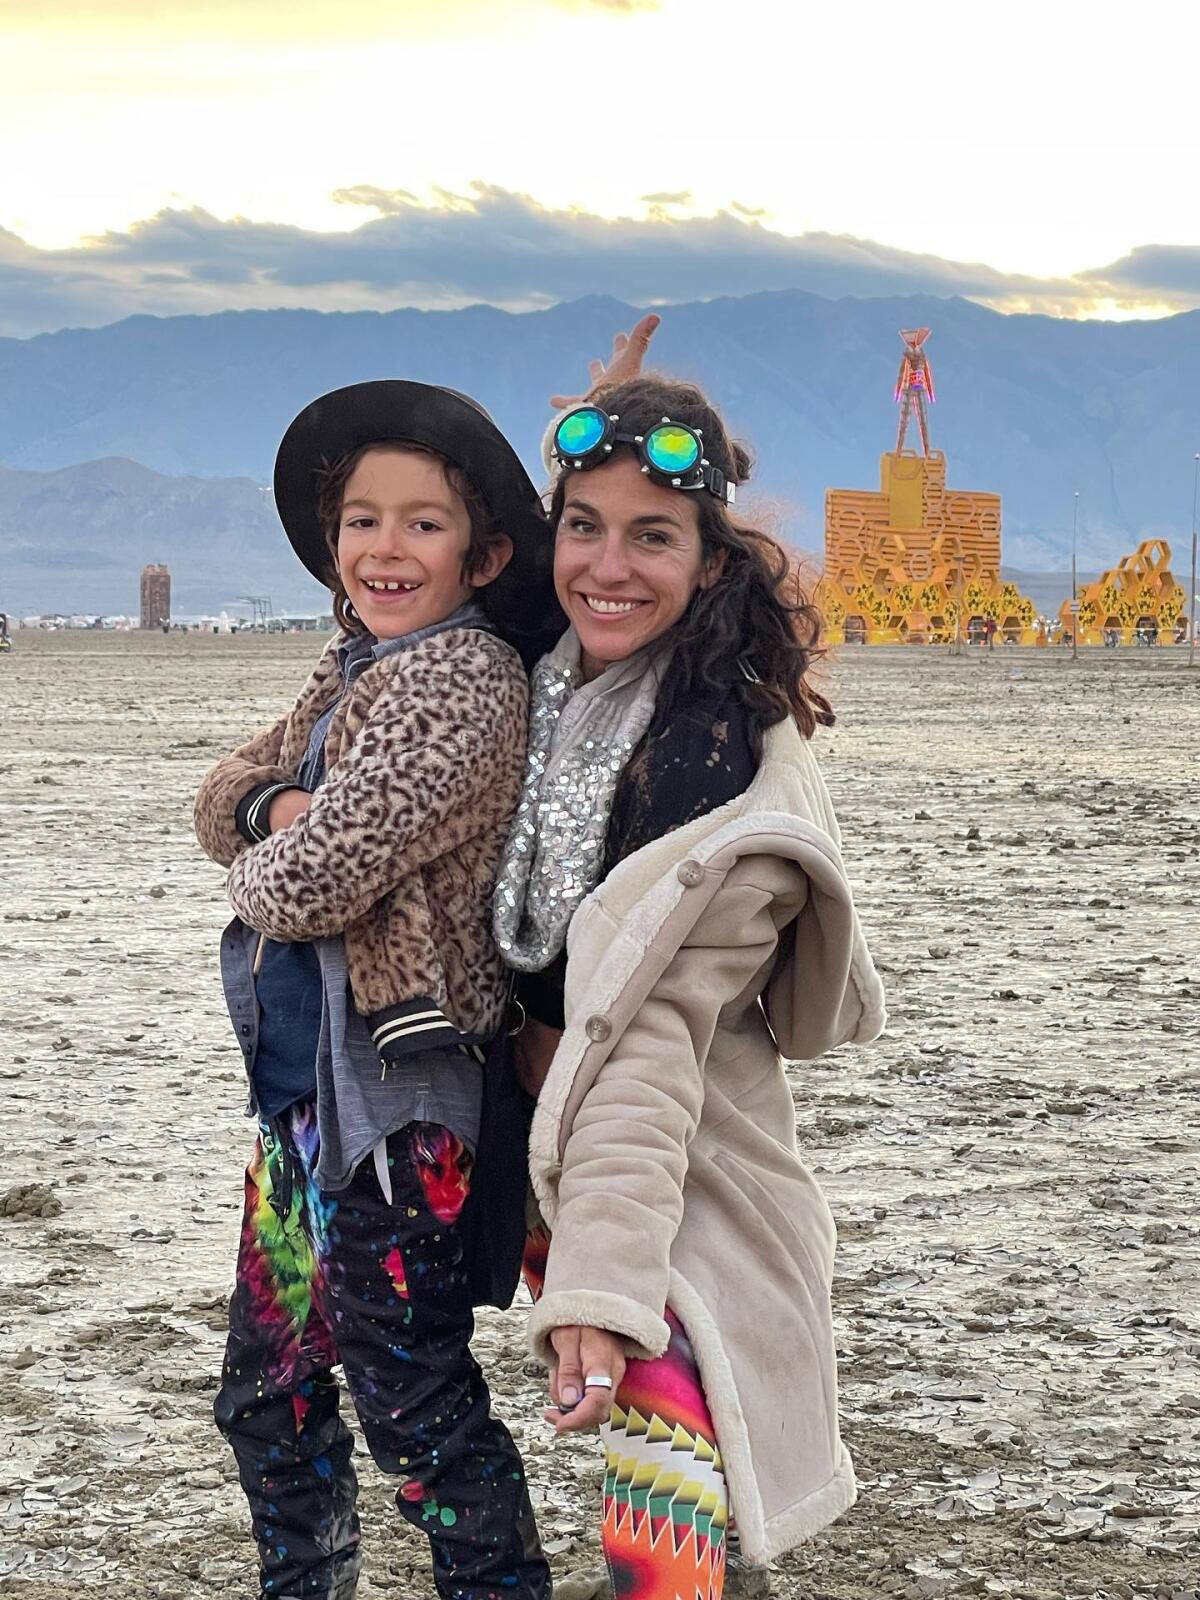 Bianca Snyder poses with her 7-year-old son Tage at Burning Man.